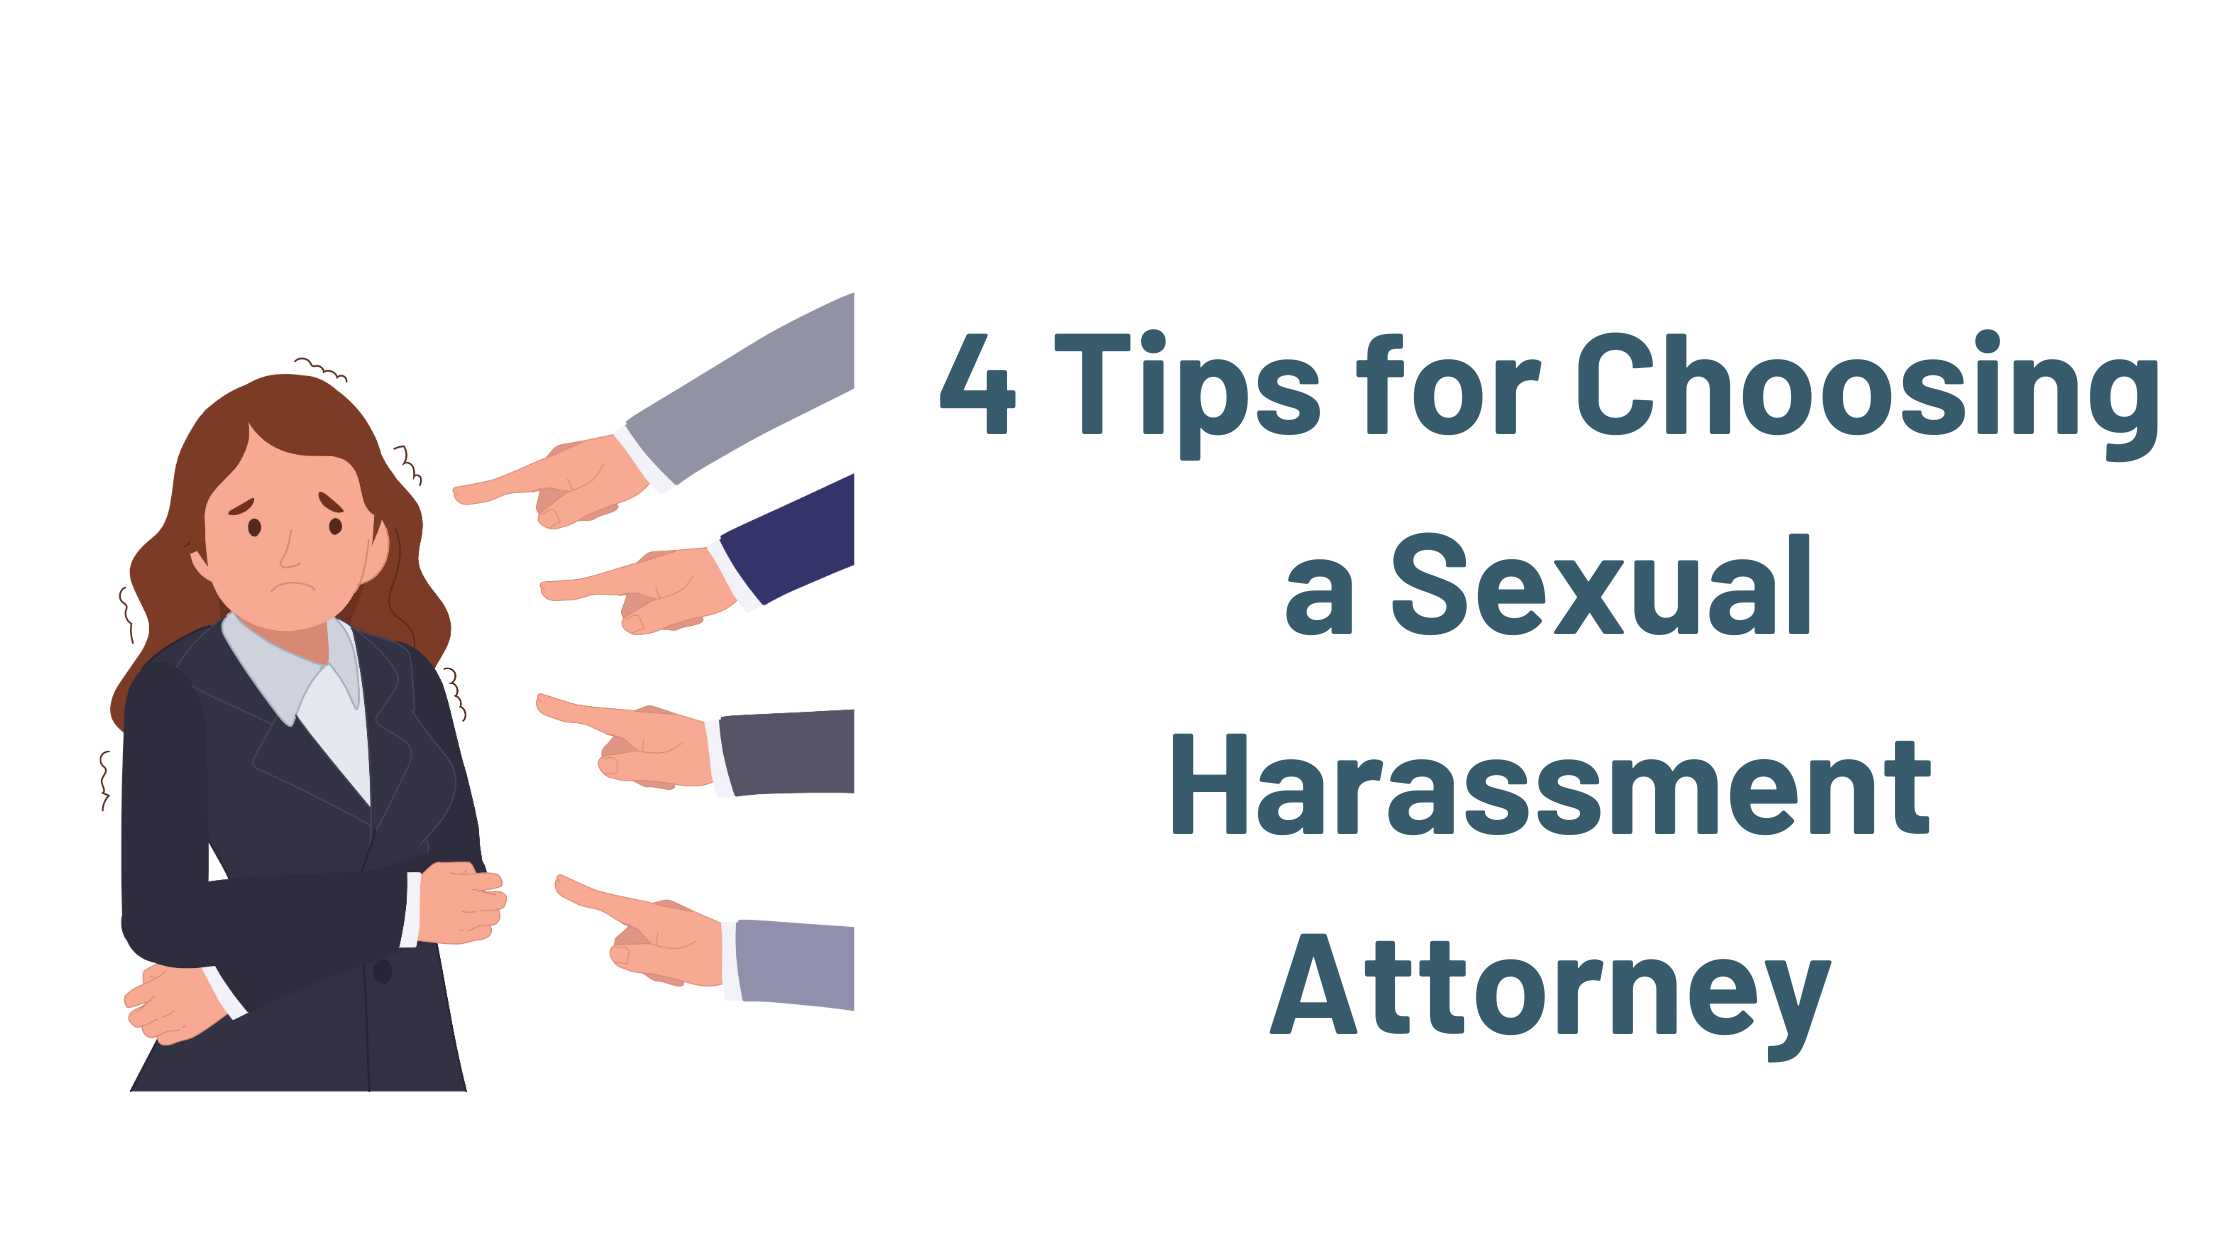 4 Tips for Choosing a Sexual Harassment Attorney